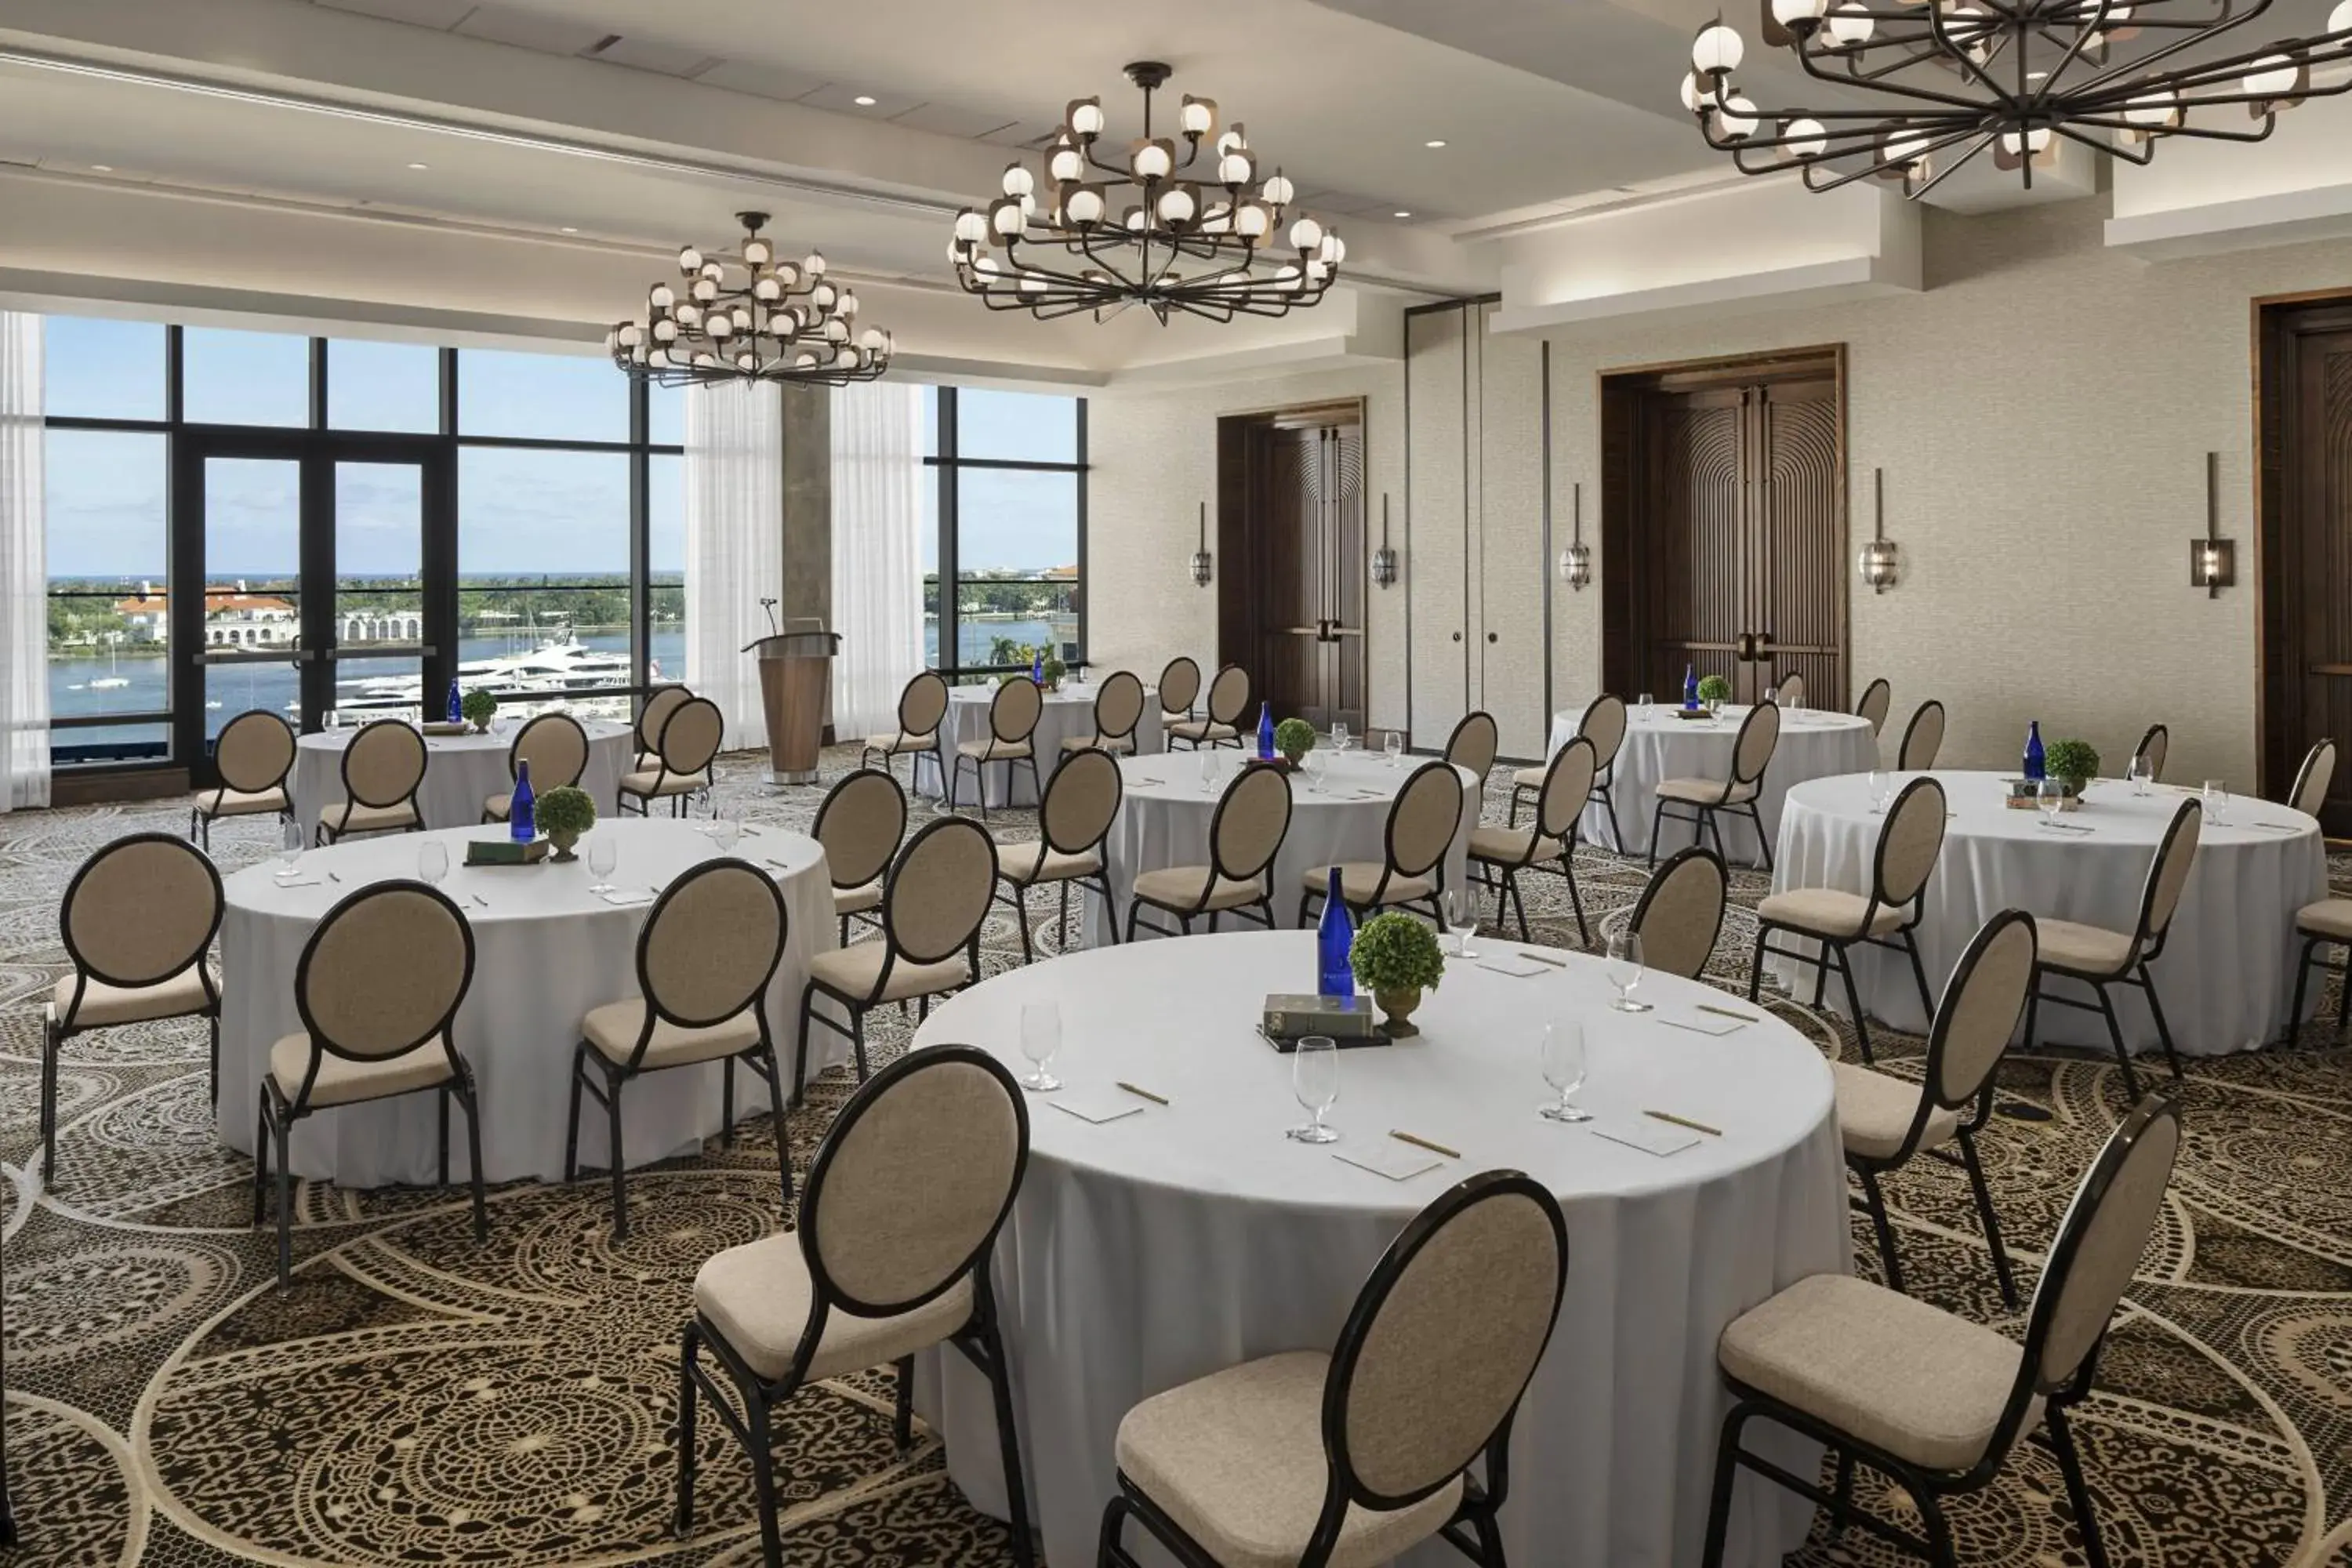 Meeting/conference room, Banquet Facilities in The Ben, Autograph Collection